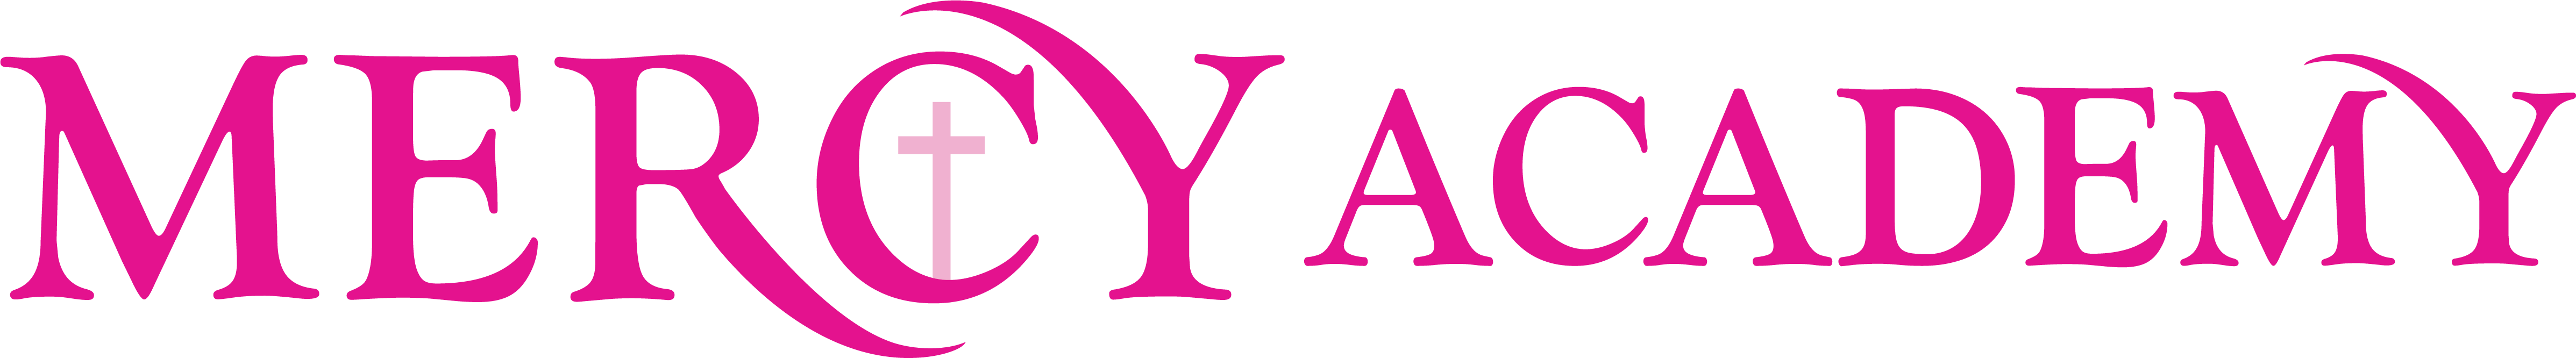 Mercy Academy logo in pink text